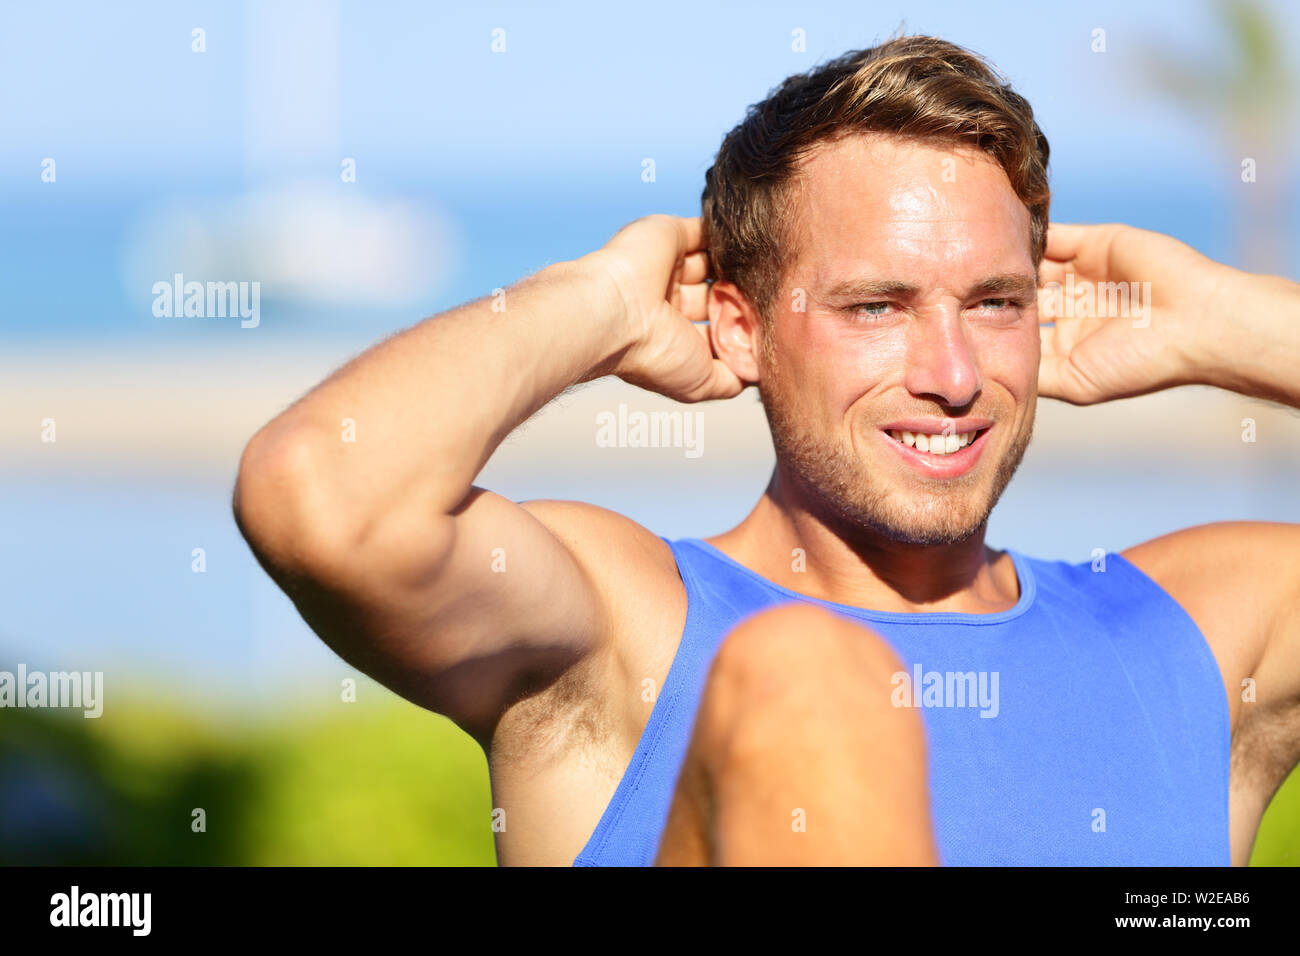 Fitness man doing sit-ups outdoor. Close up portrait of male fitness model training sit up exercise during outside workout in grass in summer. Handsome muscular male sport model working out. Stock Photo